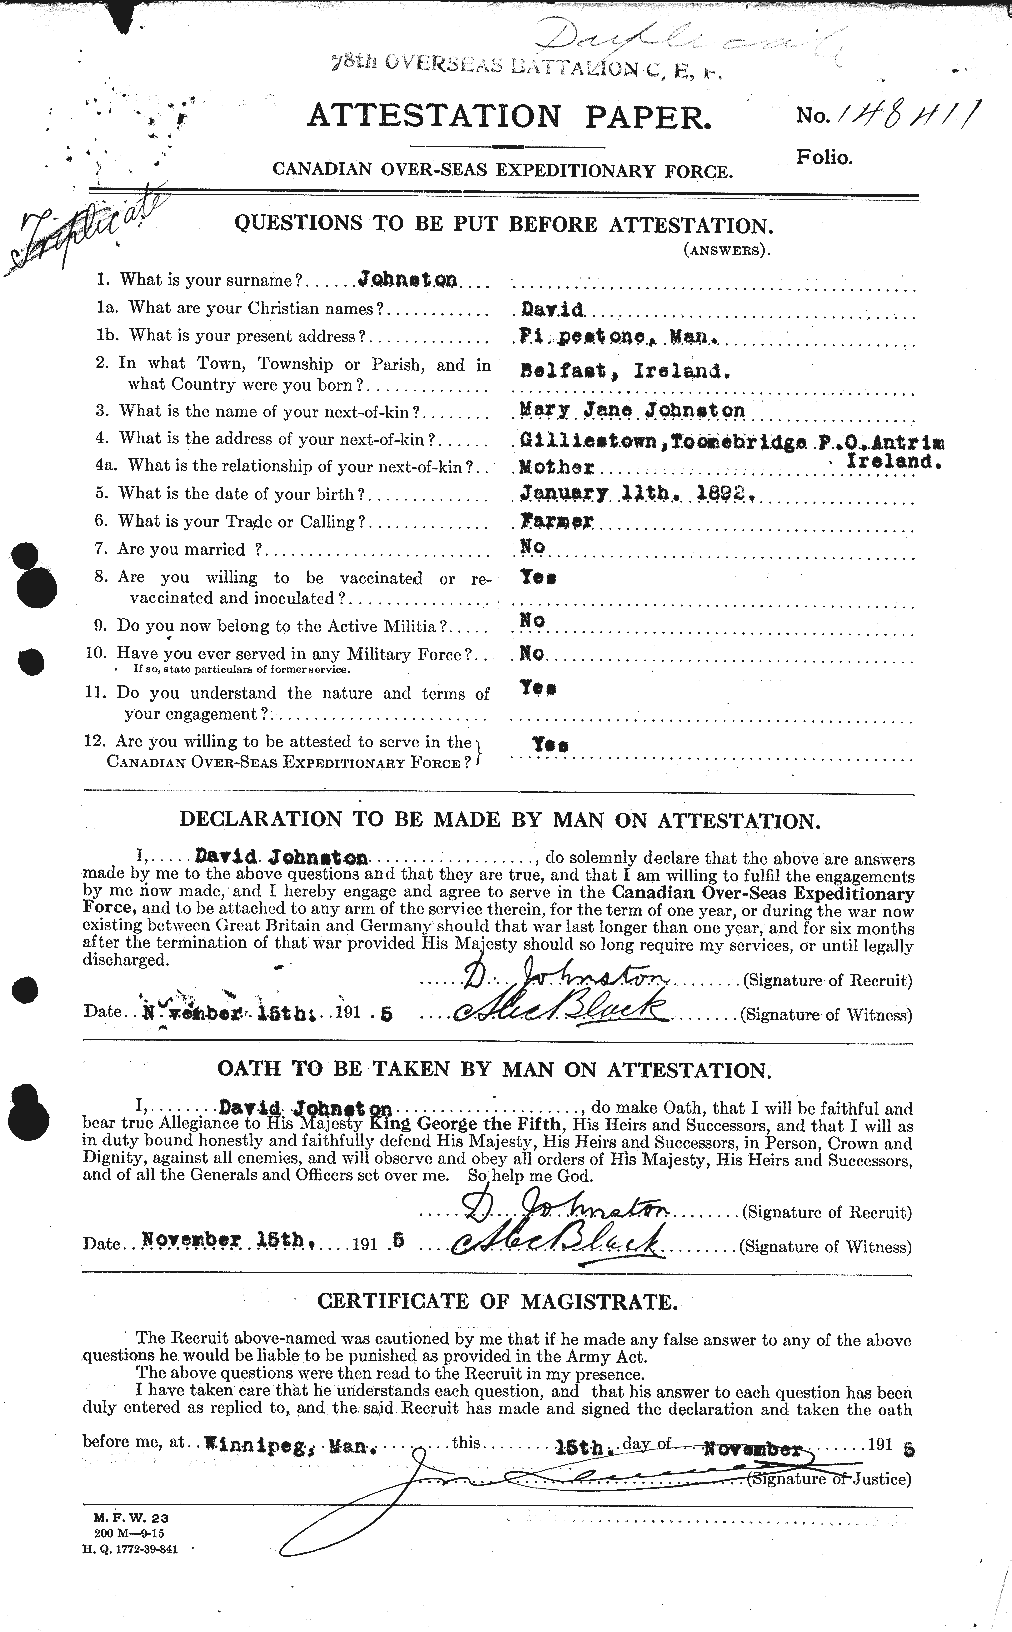 Personnel Records of the First World War - CEF 423161a